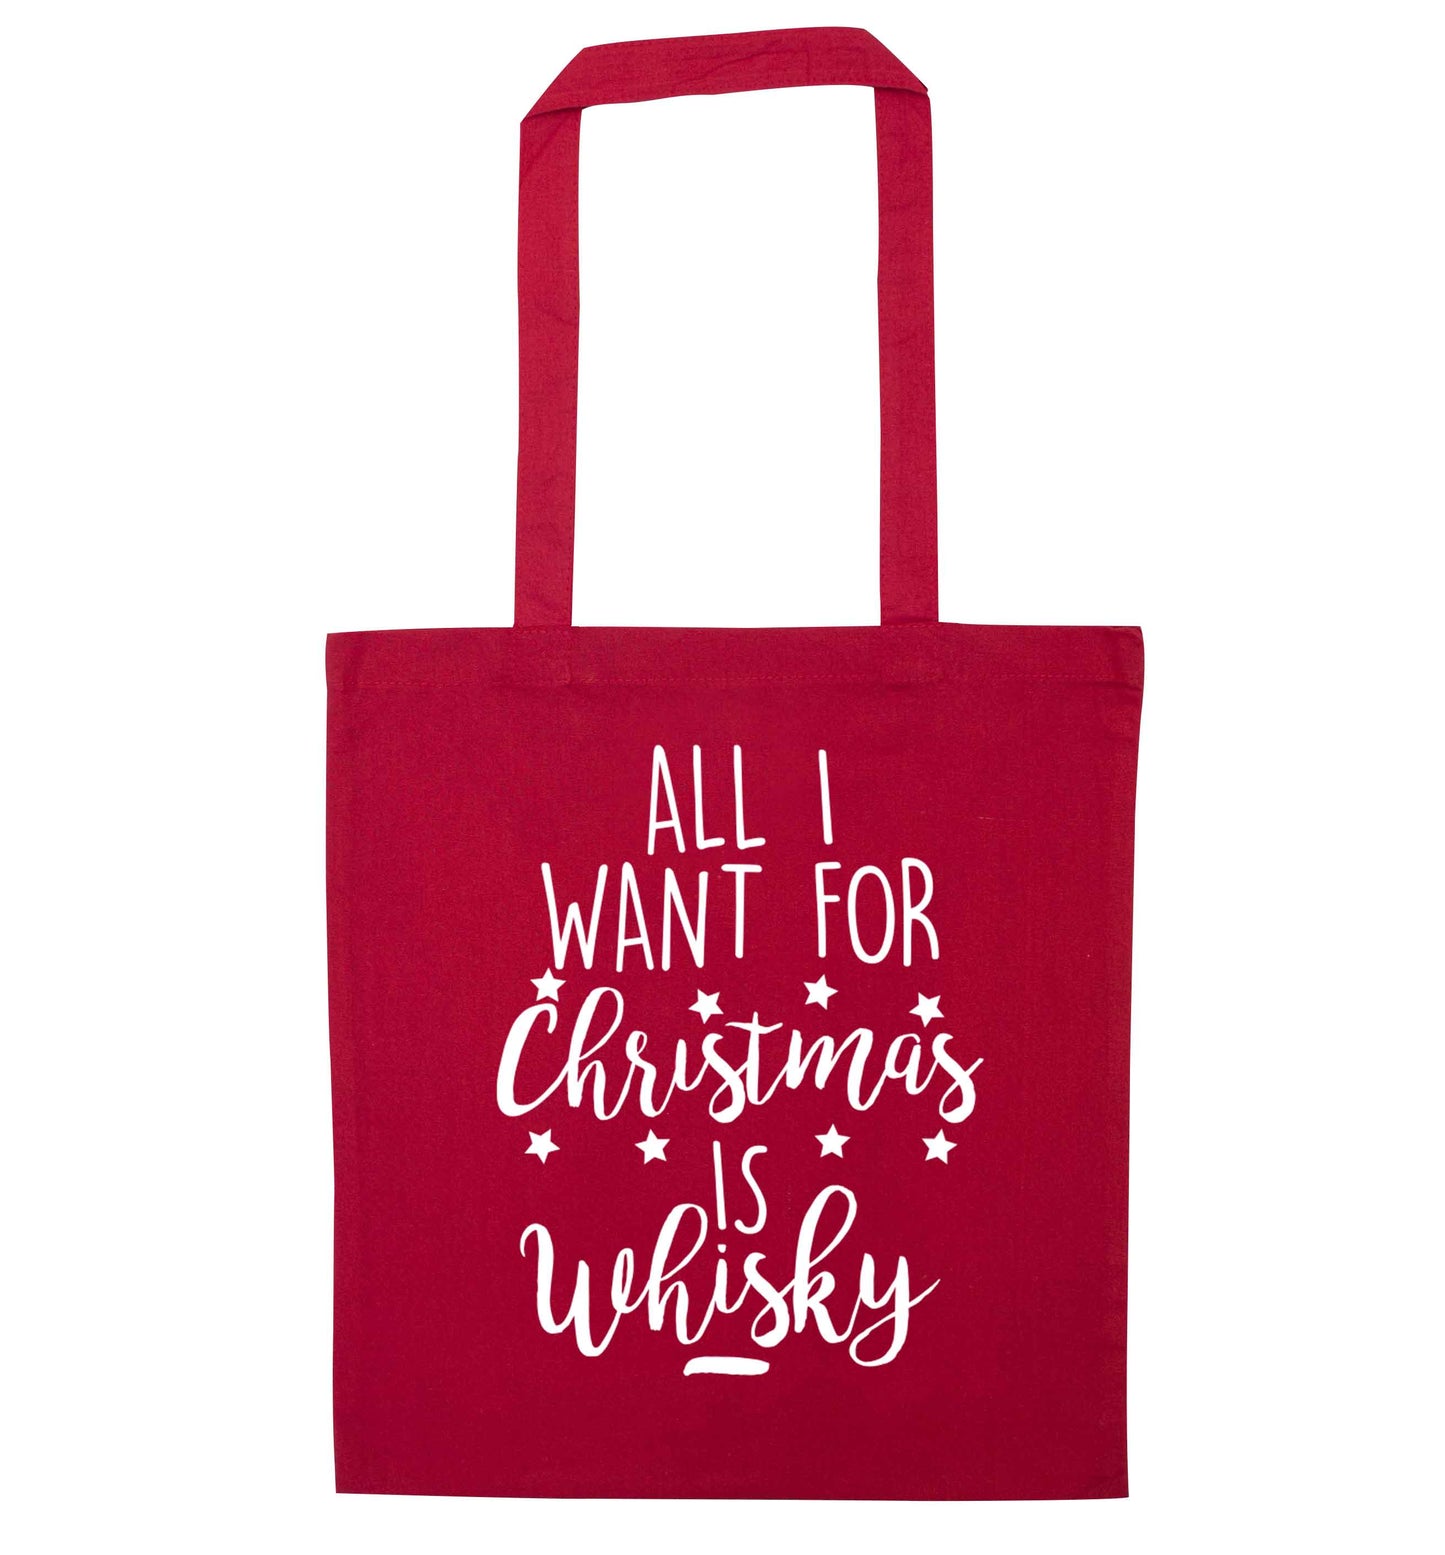 All I want for Christmas is whisky red tote bag